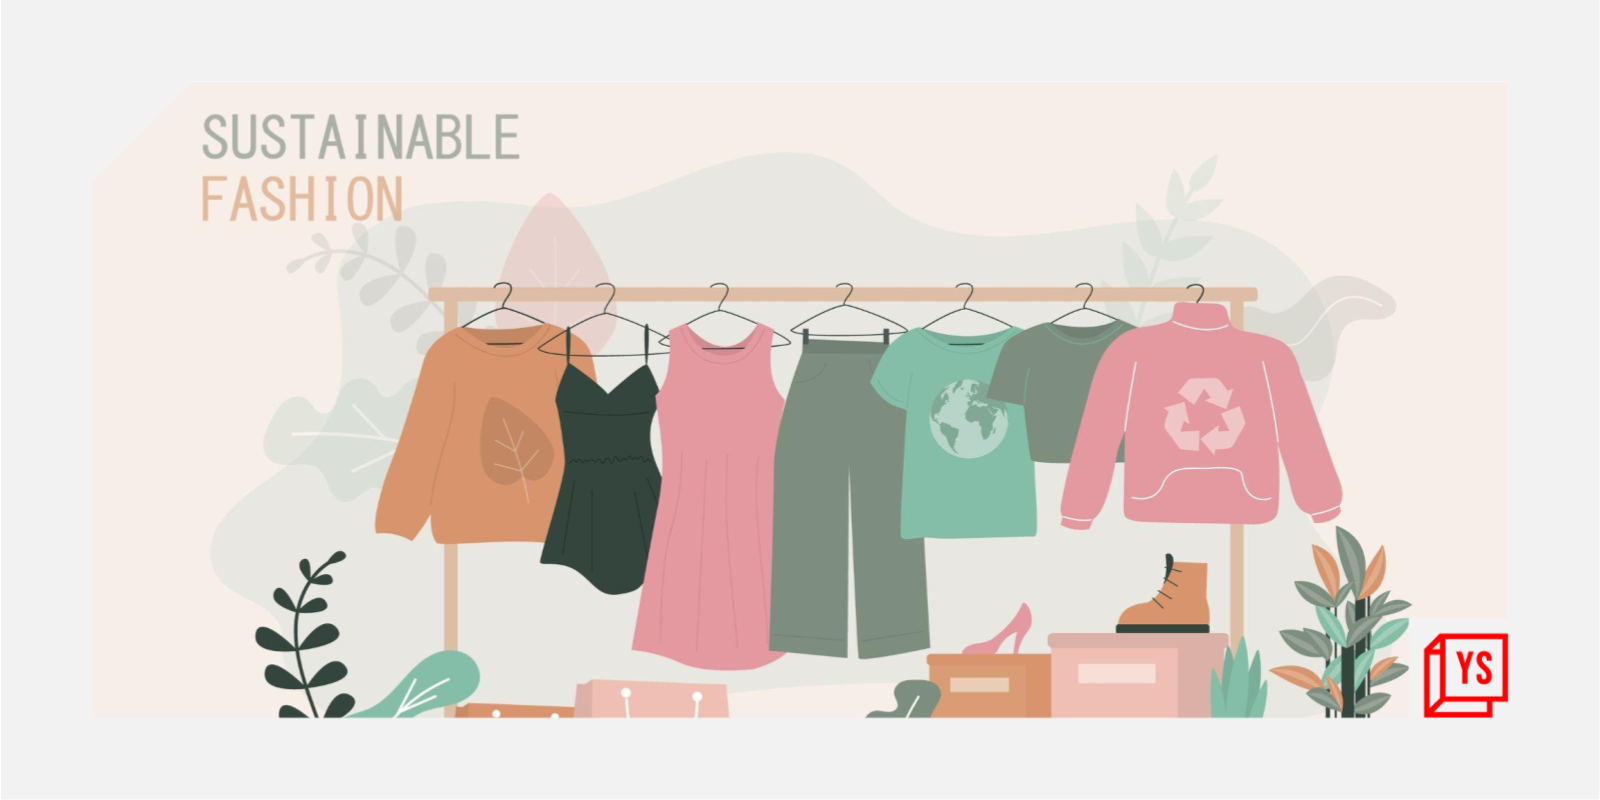 How Chief Sustainability Officers can be the saviour of fashion and luxury brands

